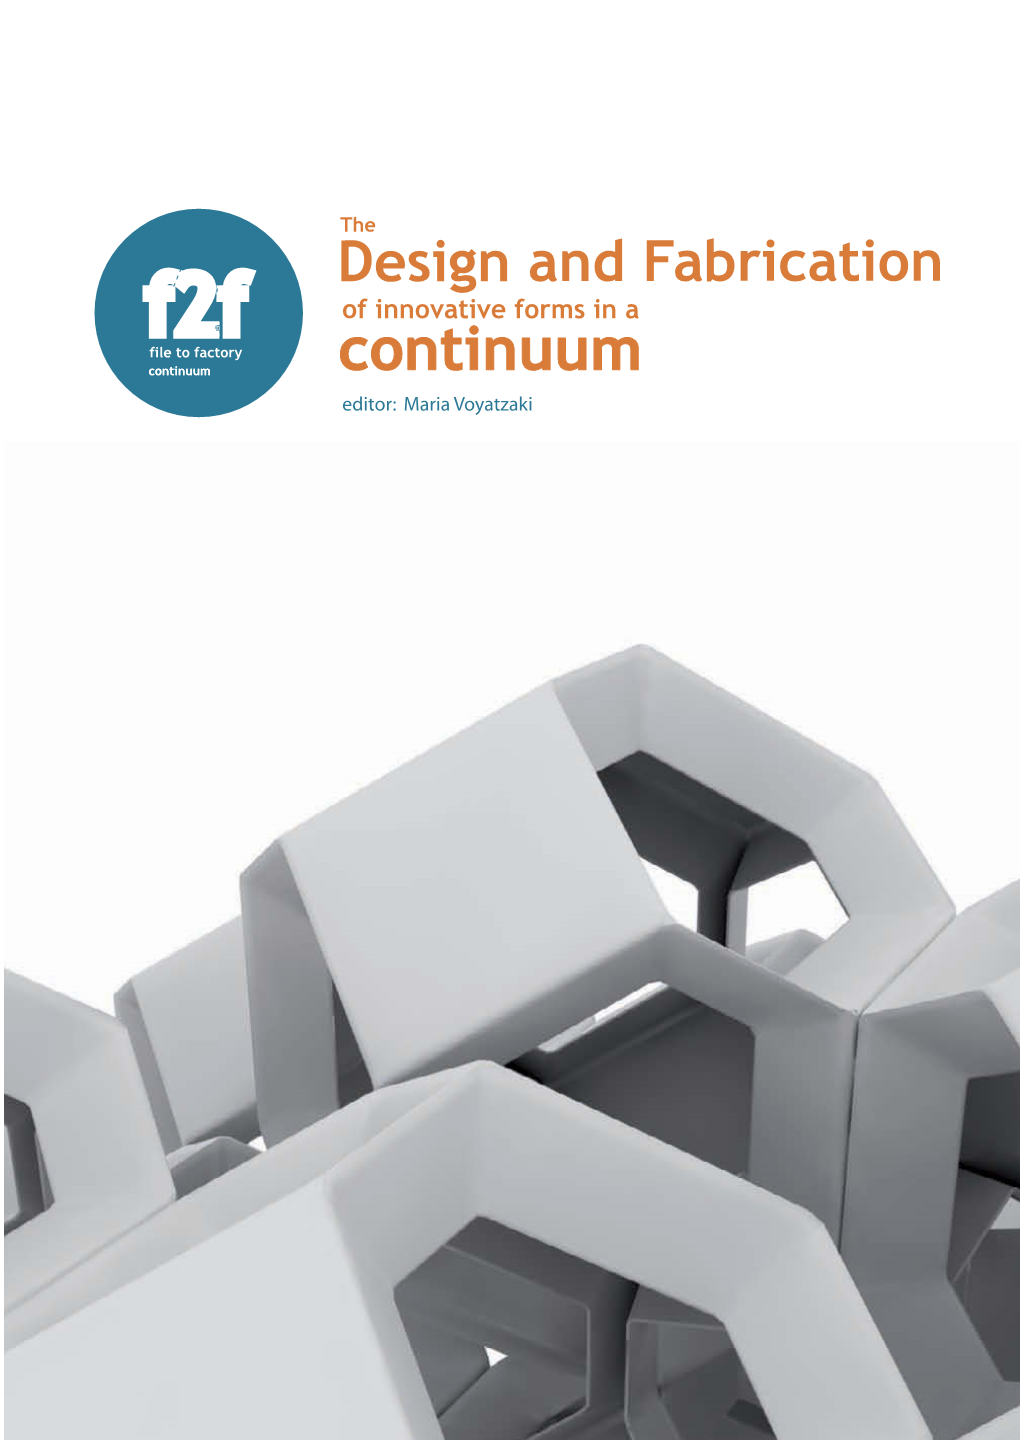 The Design and Fabrication of Innovative Forms in a Continuum